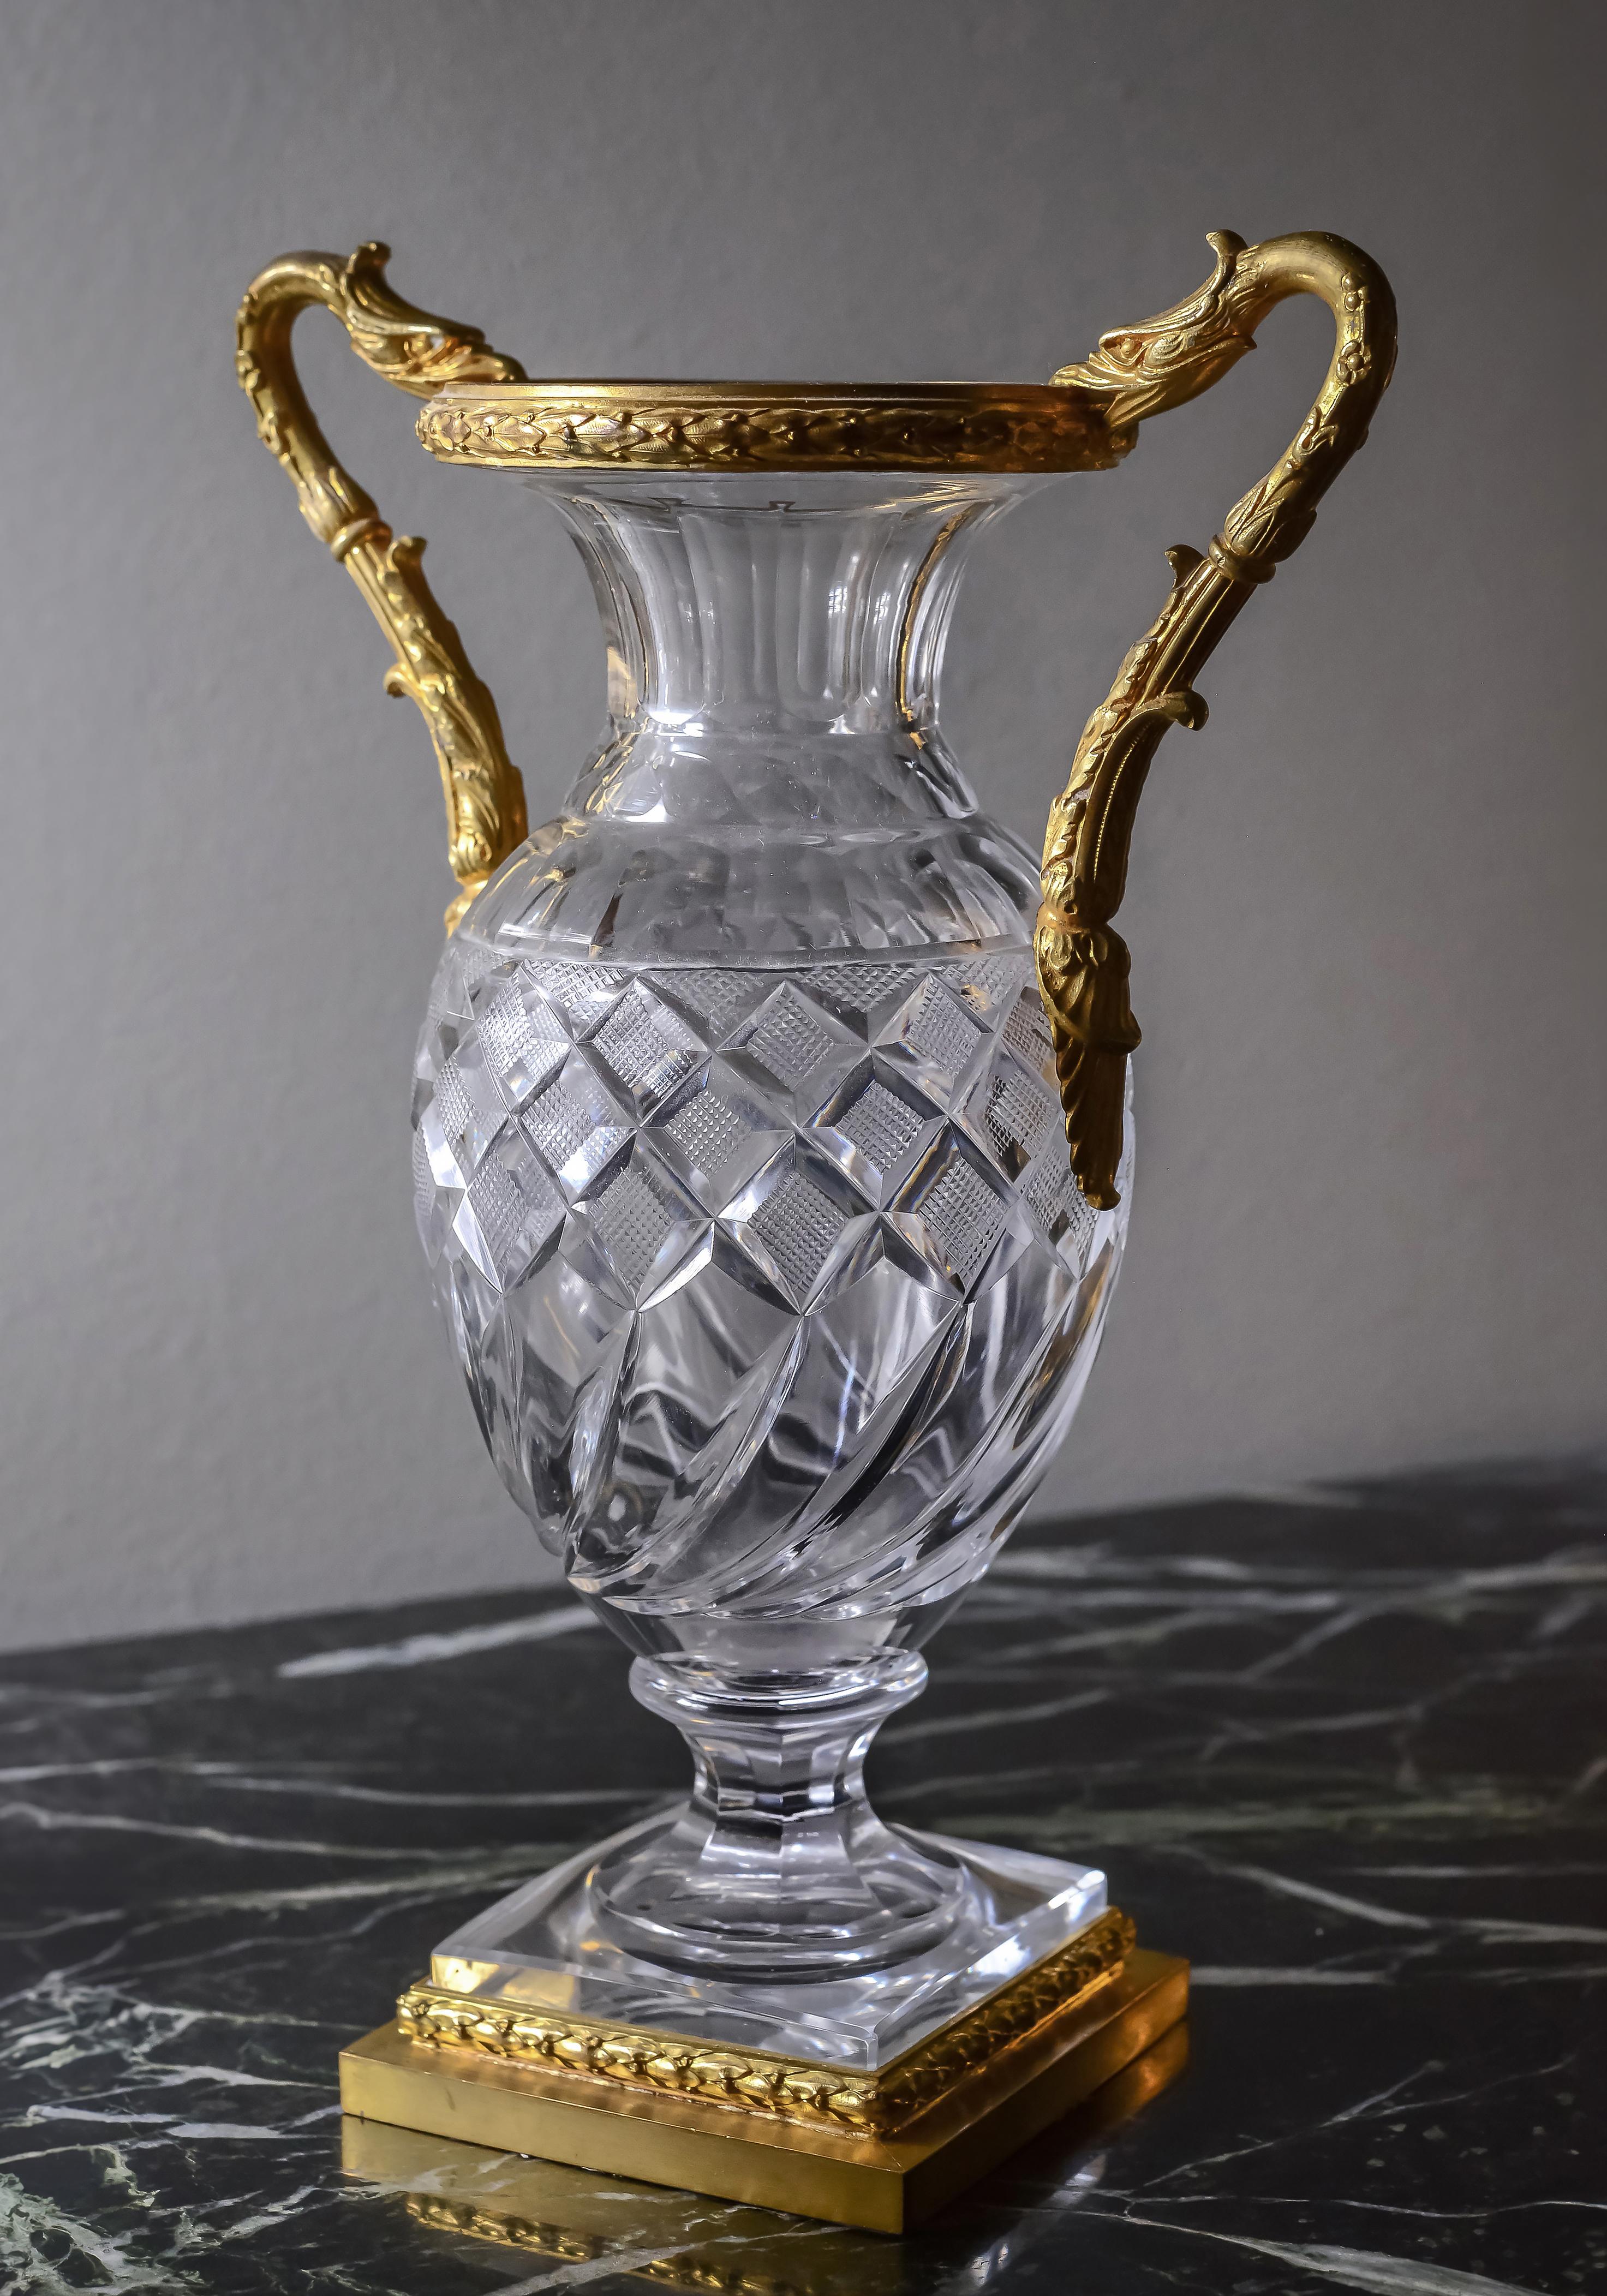 Baccarat Empire Cut Crystal Glass Vases w Gilt Bronze Griffon Heads 19th century For Sale 3